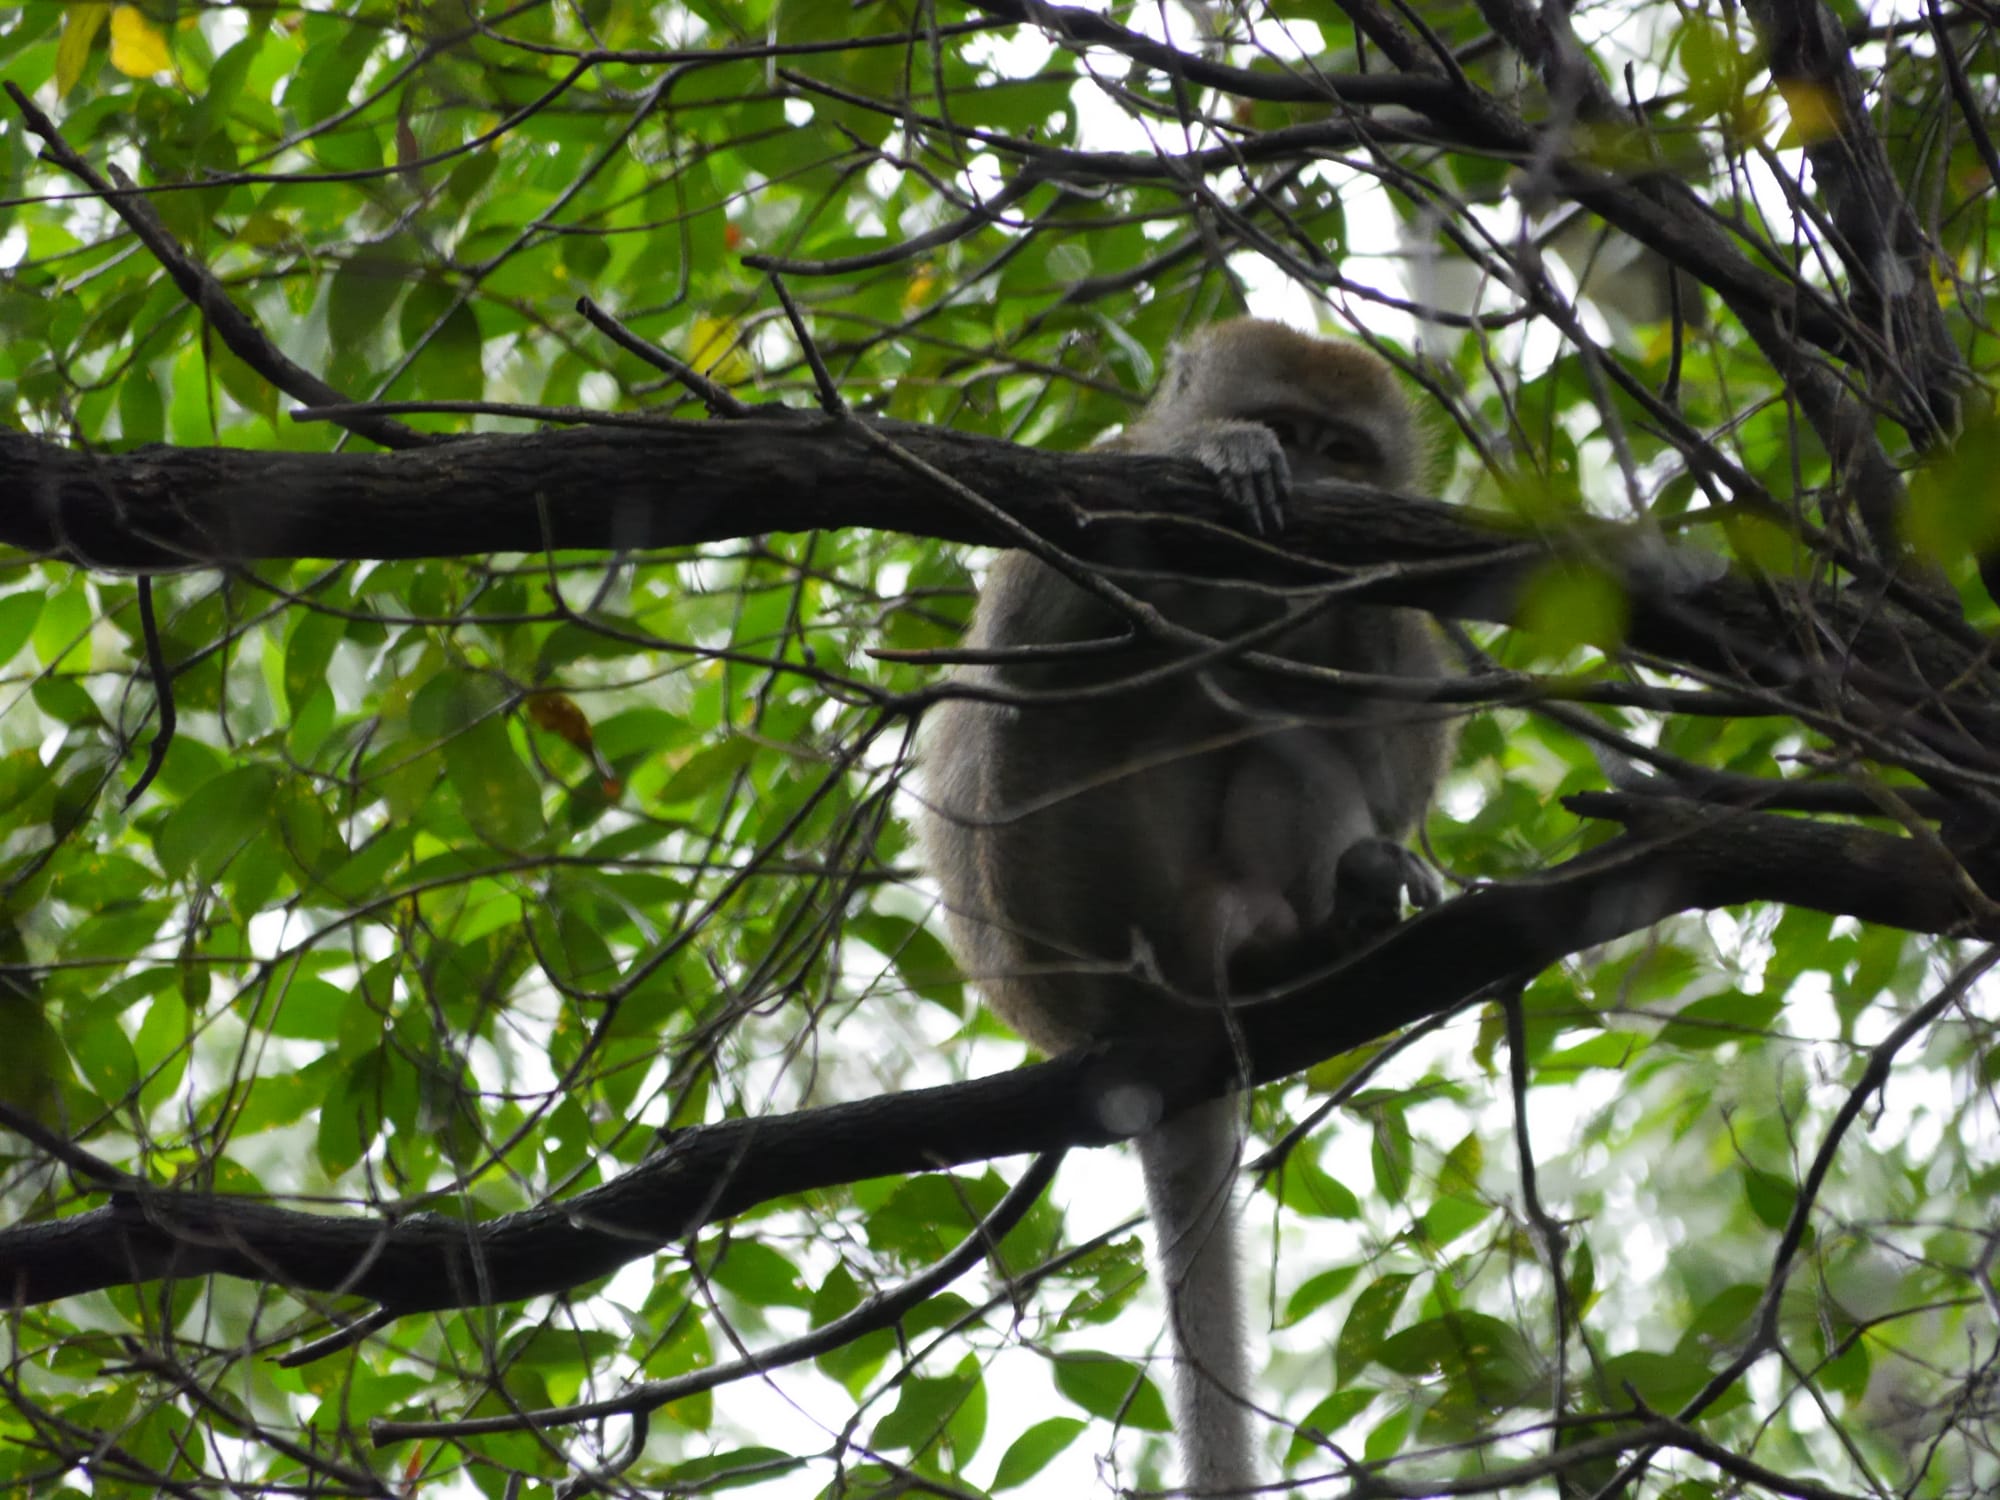 Photo by Author — Long-tailed Macaque (Macaca fascicularis — Admiralty Park, Woodlands, Singapore